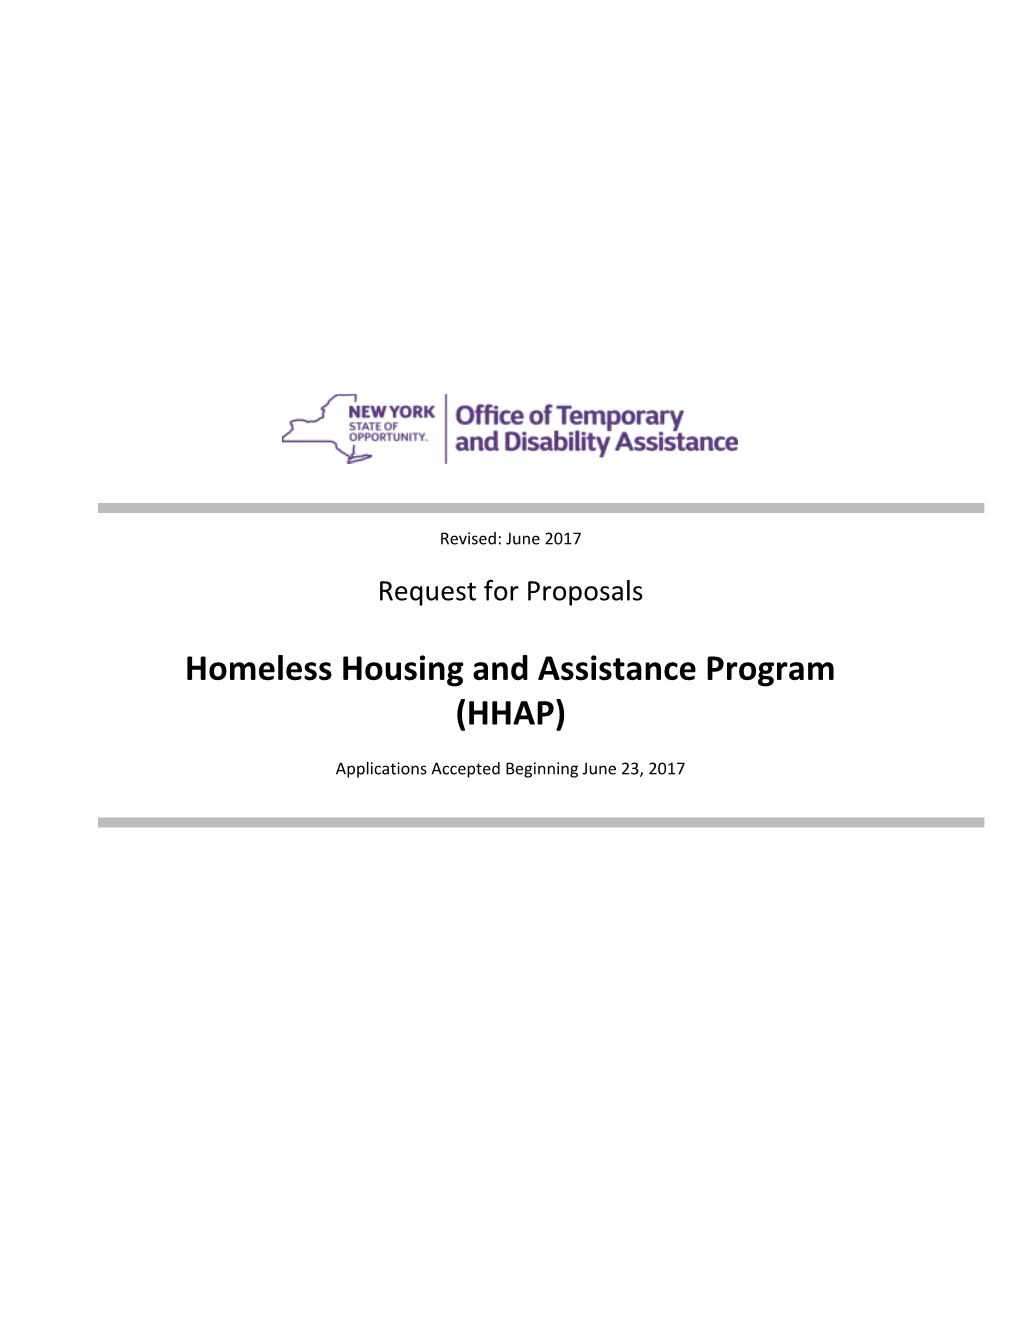 Homeless Housing and Assistance Program